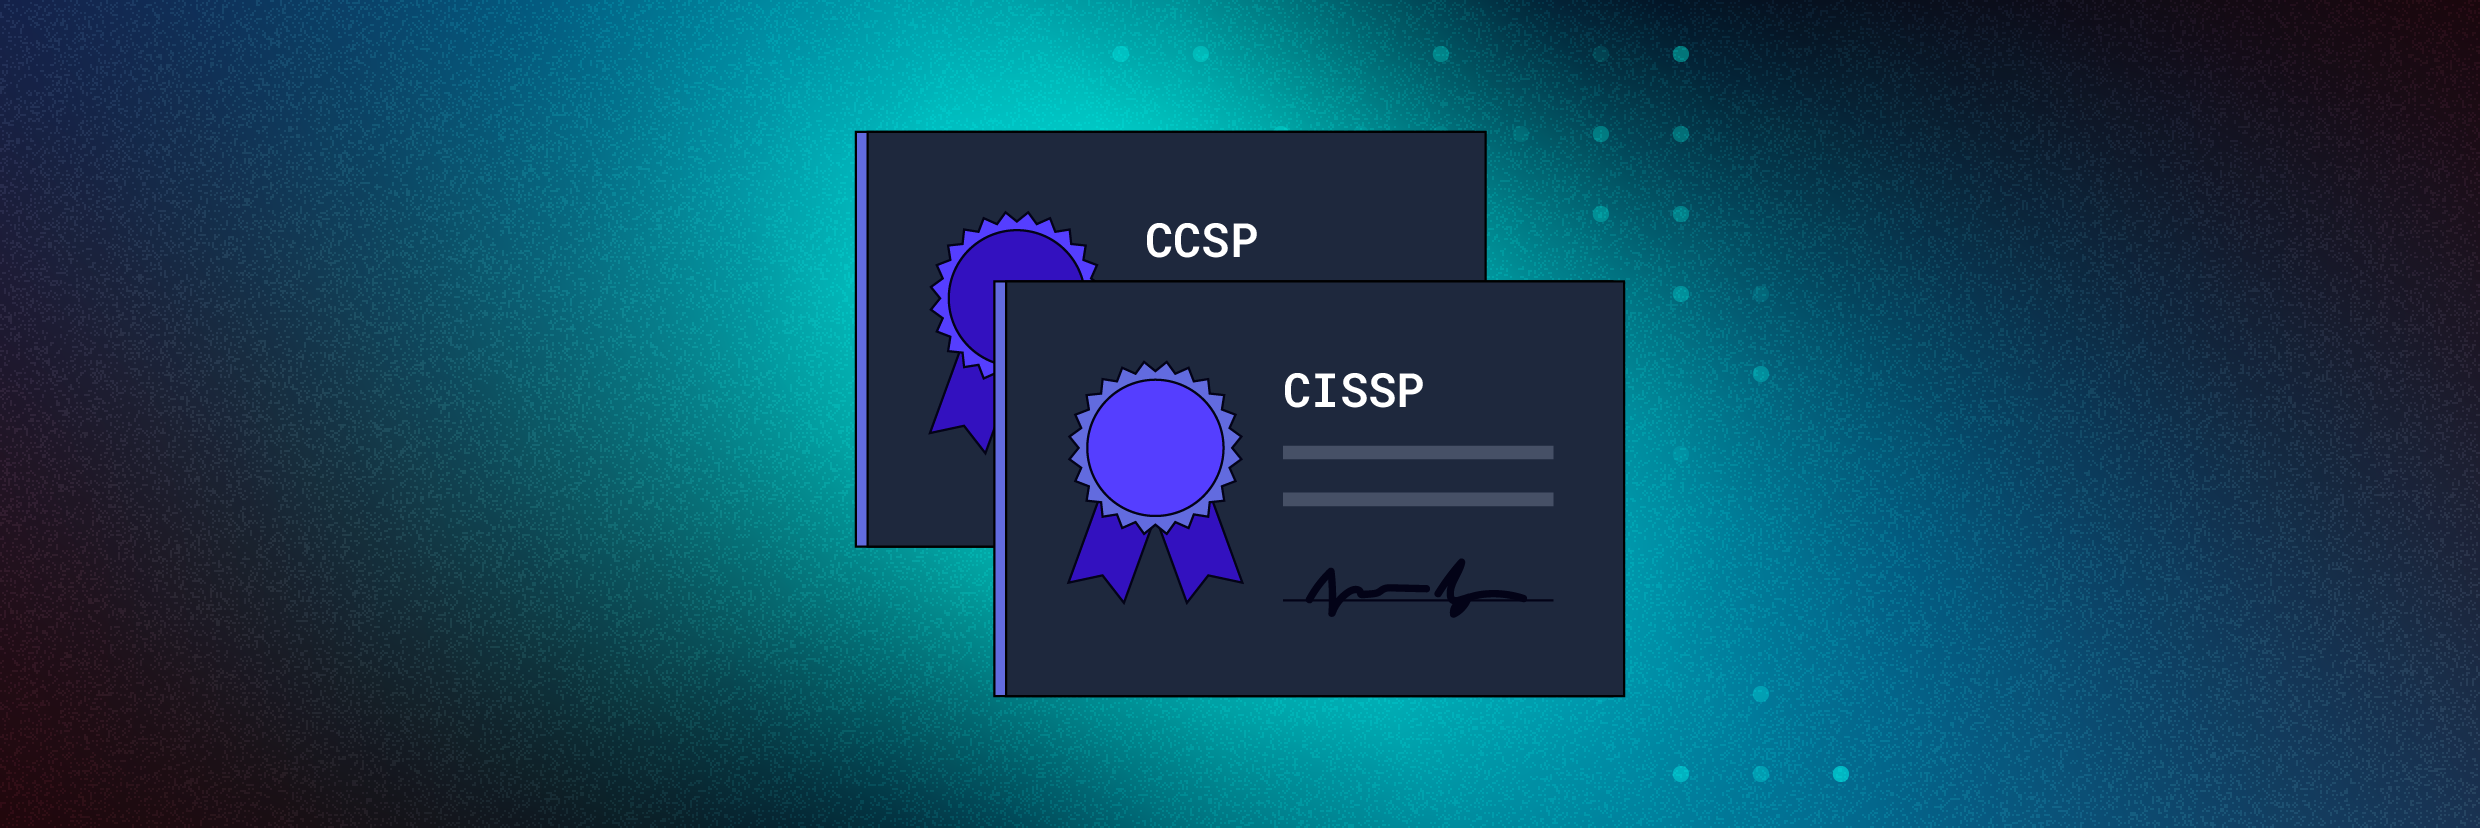 Two certifications shown on an aquamarine gradient background: One for CCSP and one for CISSP.